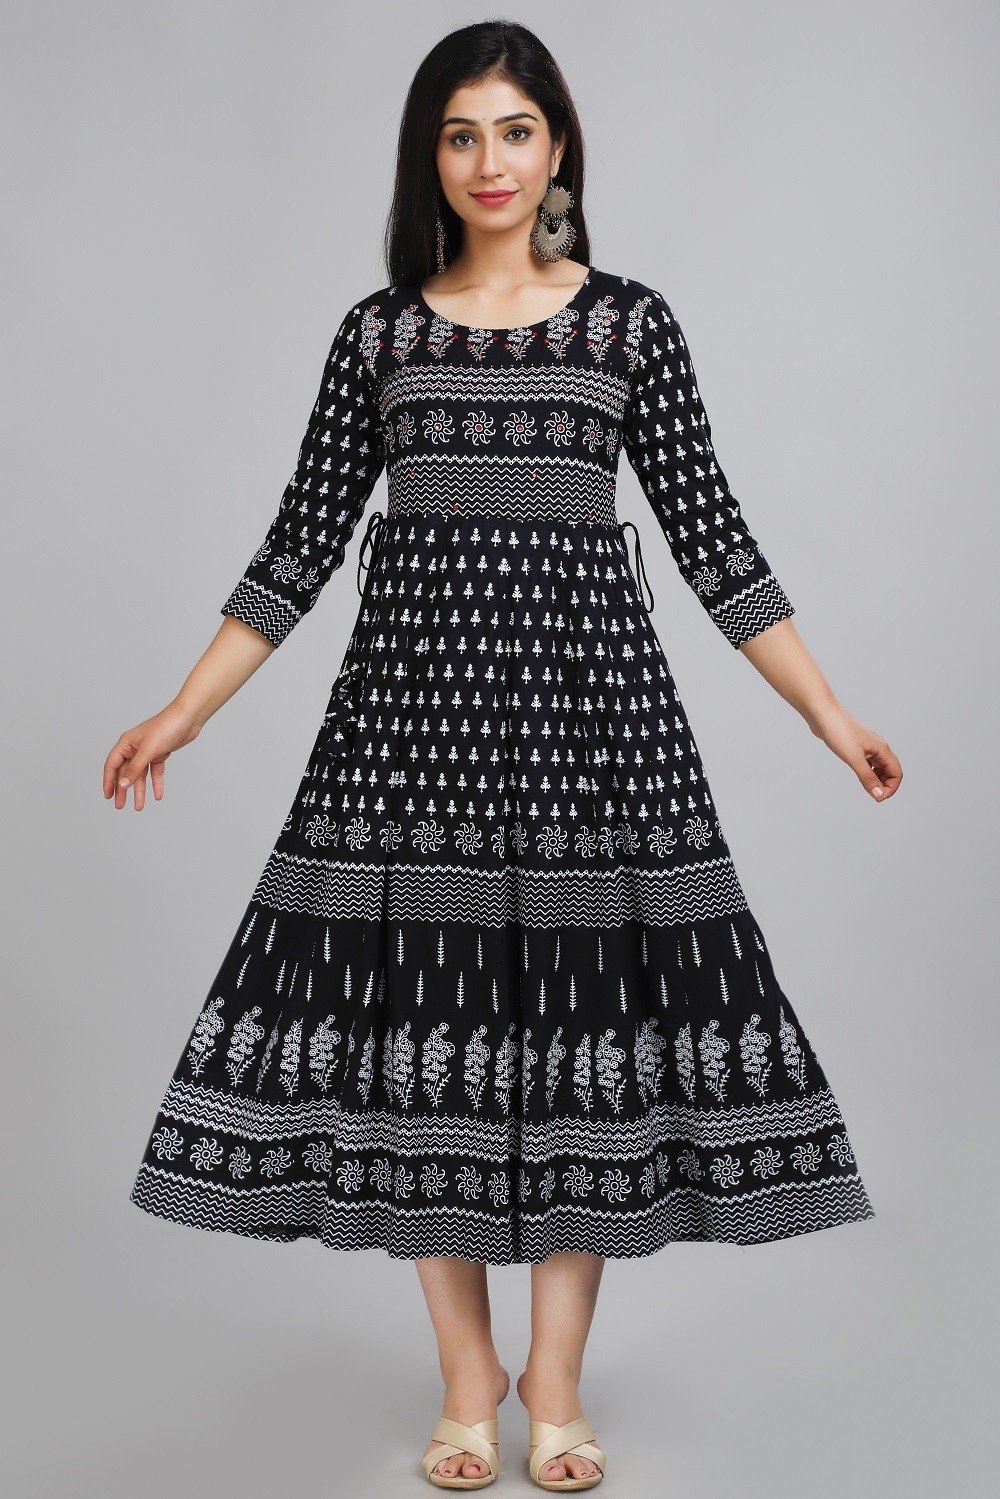 Kairab | Women's Rayon Embroidered and Hand Work Falred Ethnic Gown Kurti